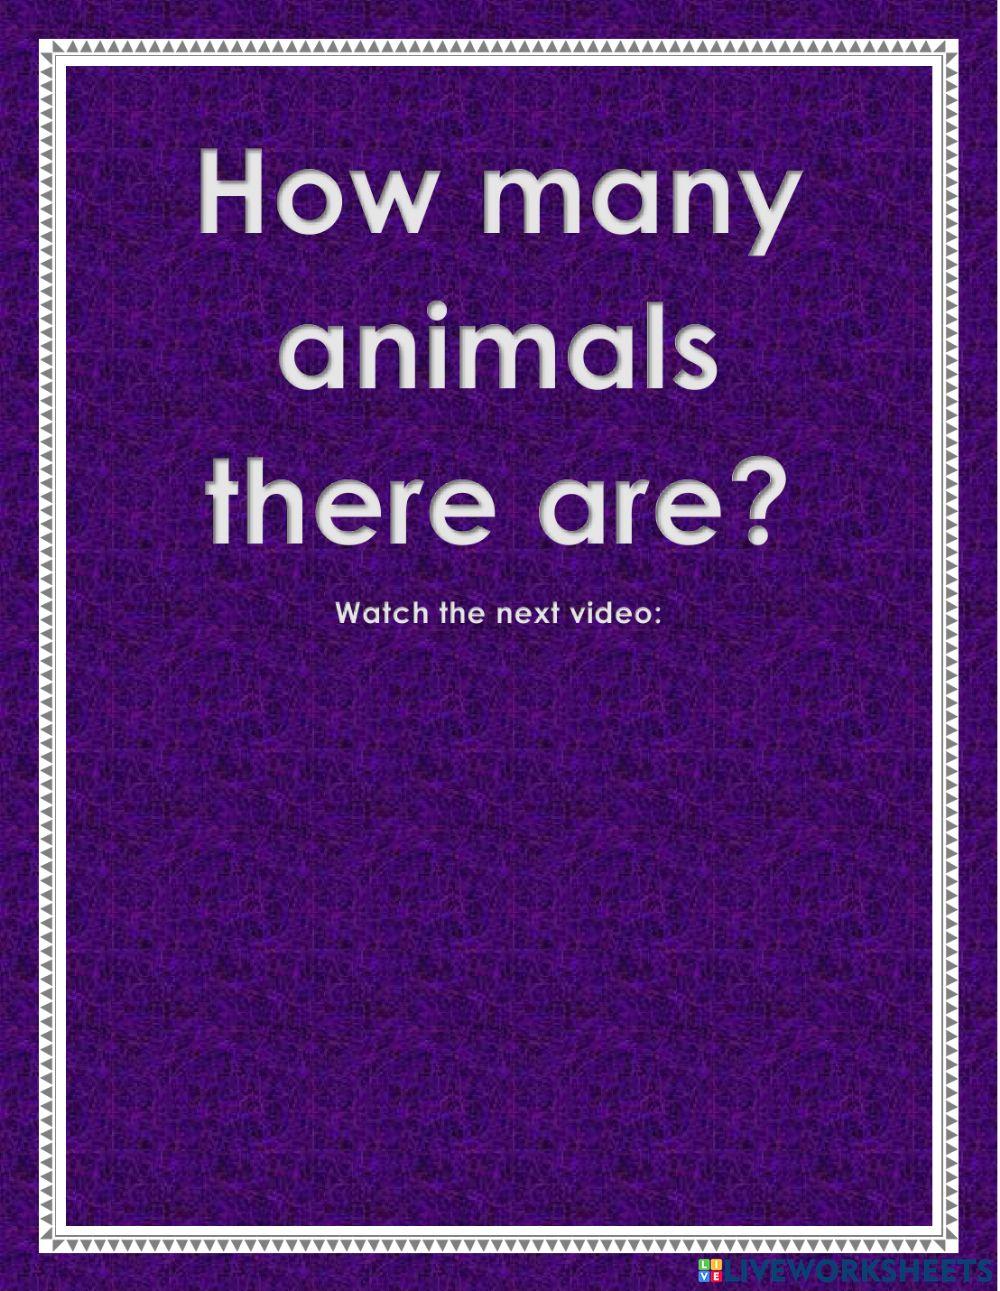 How many animals can you see?